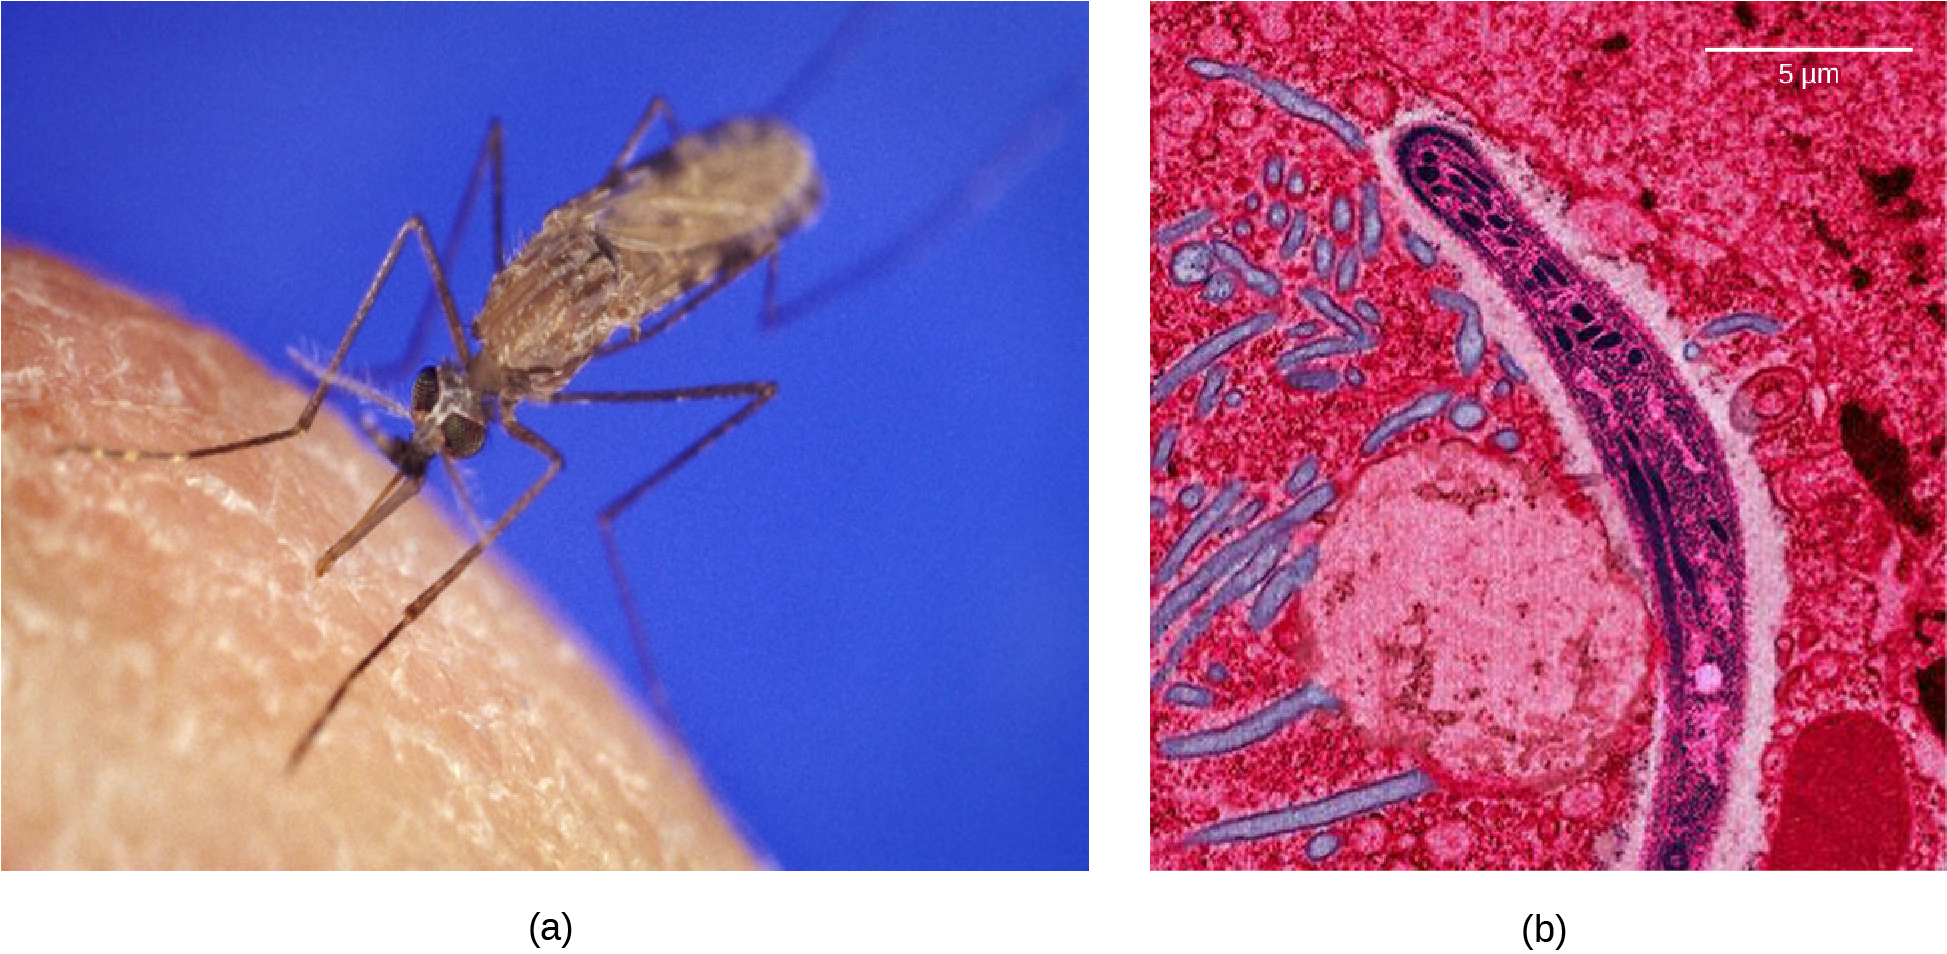 Photo a shows the Anopheles gambiae mosquito, which carries malaria.